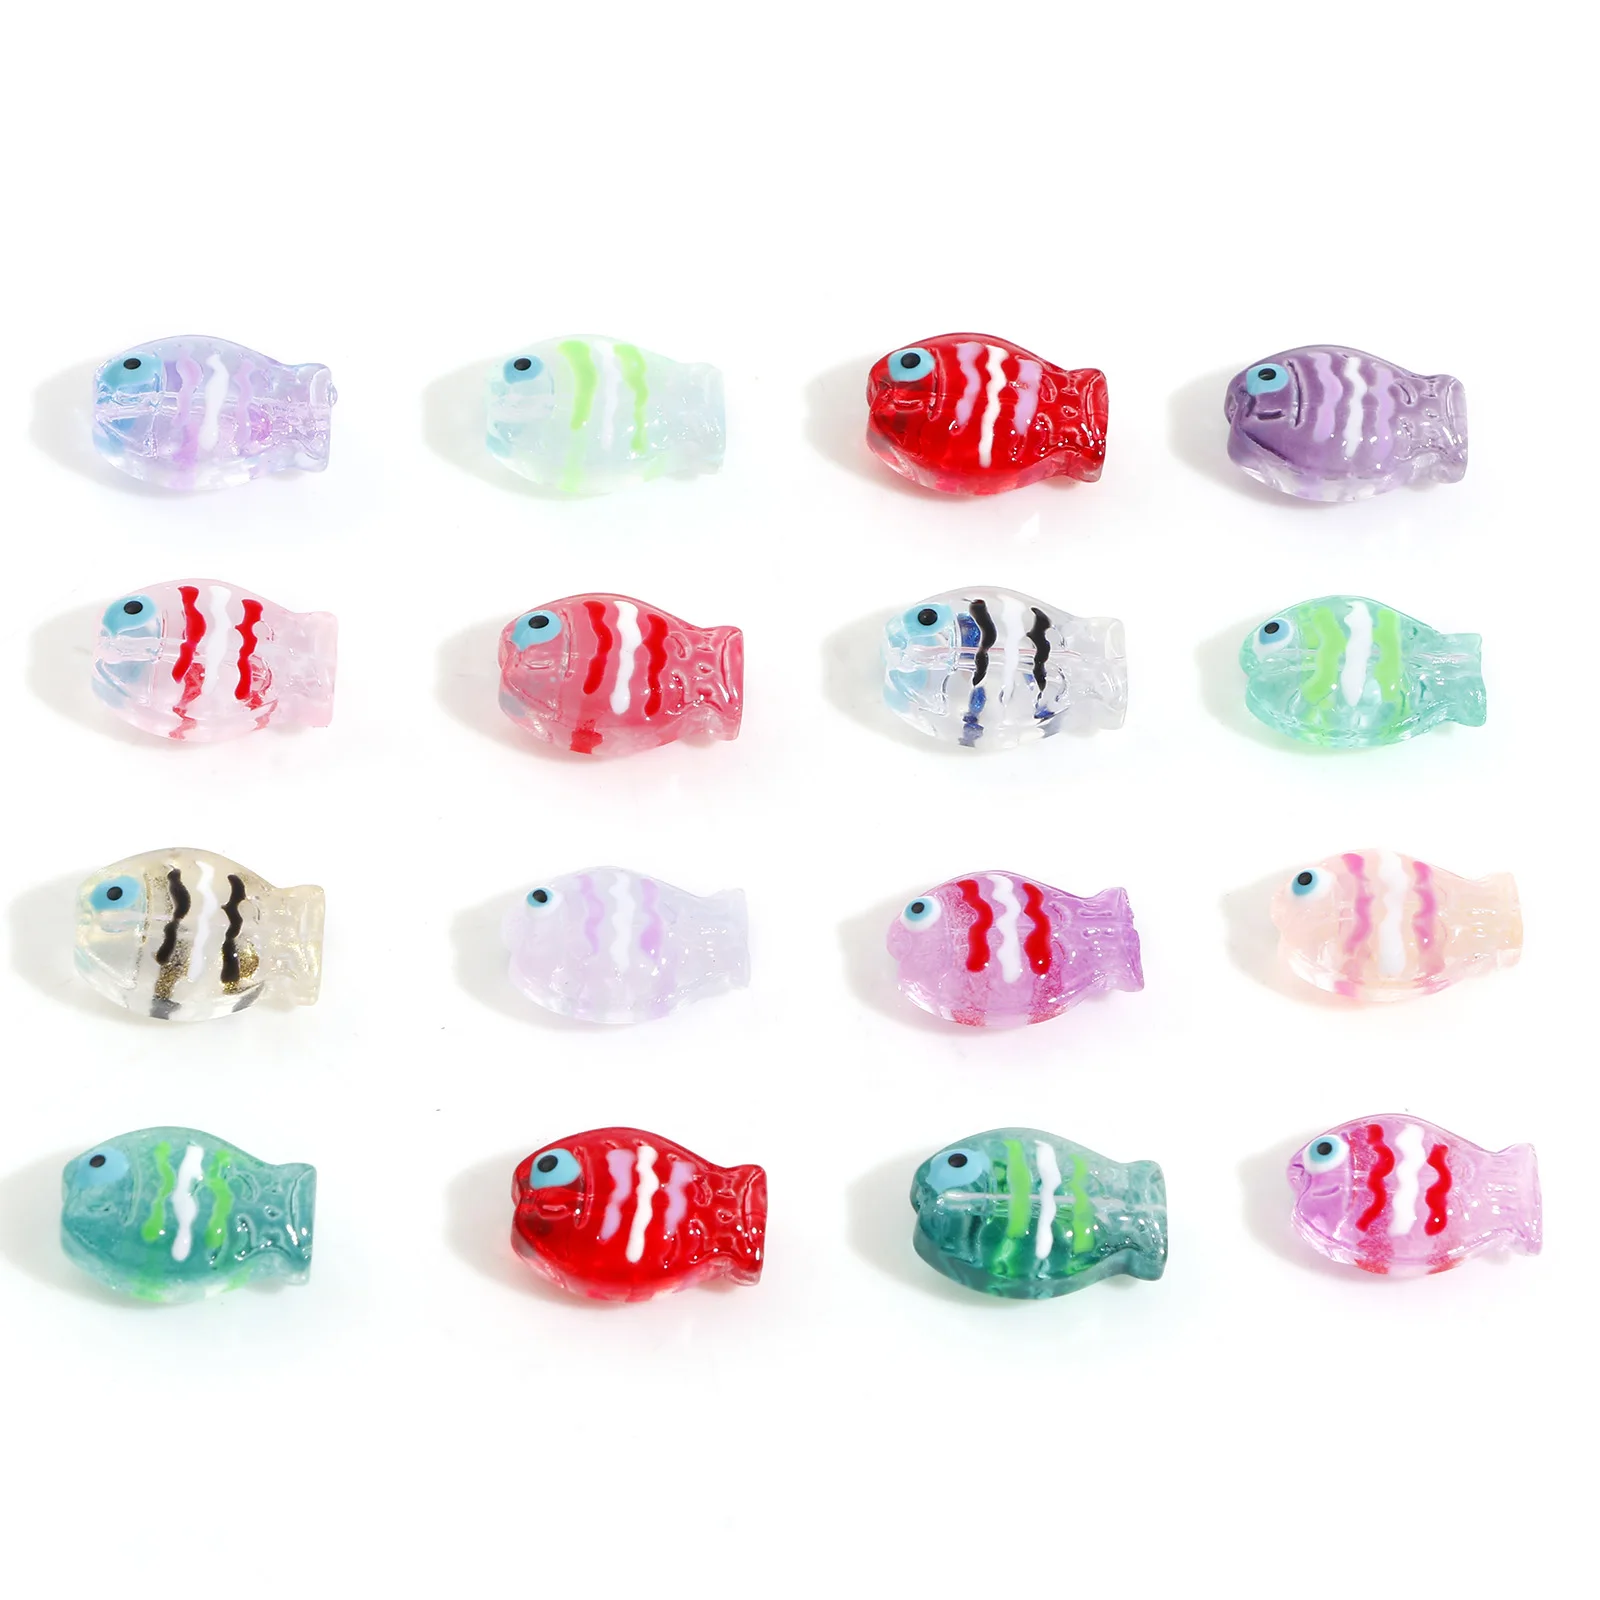 

5 PCs Lampwork Glass Ocean Jewelry Beads For Jewelry Making Fish Animal Multicolor Enamel Beads Bracelet DIY About 14mm x 10mm